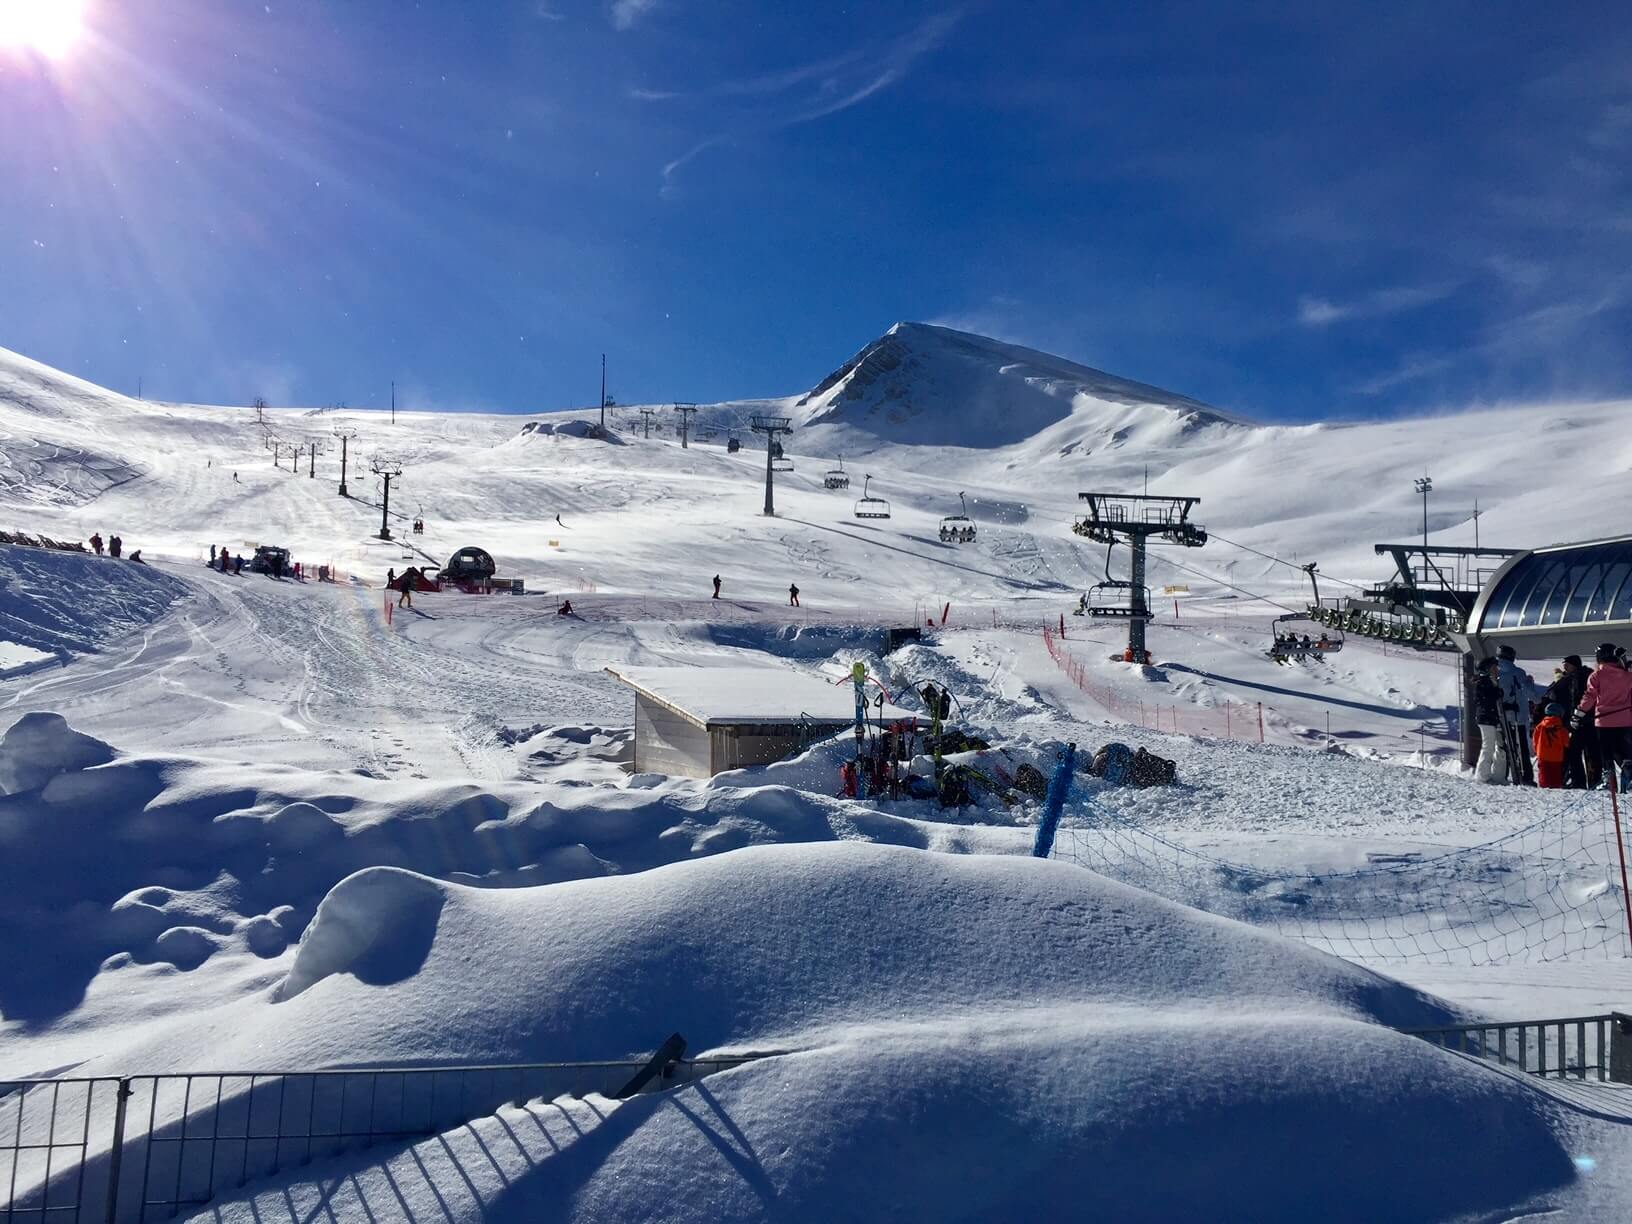 Parnassos – Chalets and outdoor areas of the Ski Center open